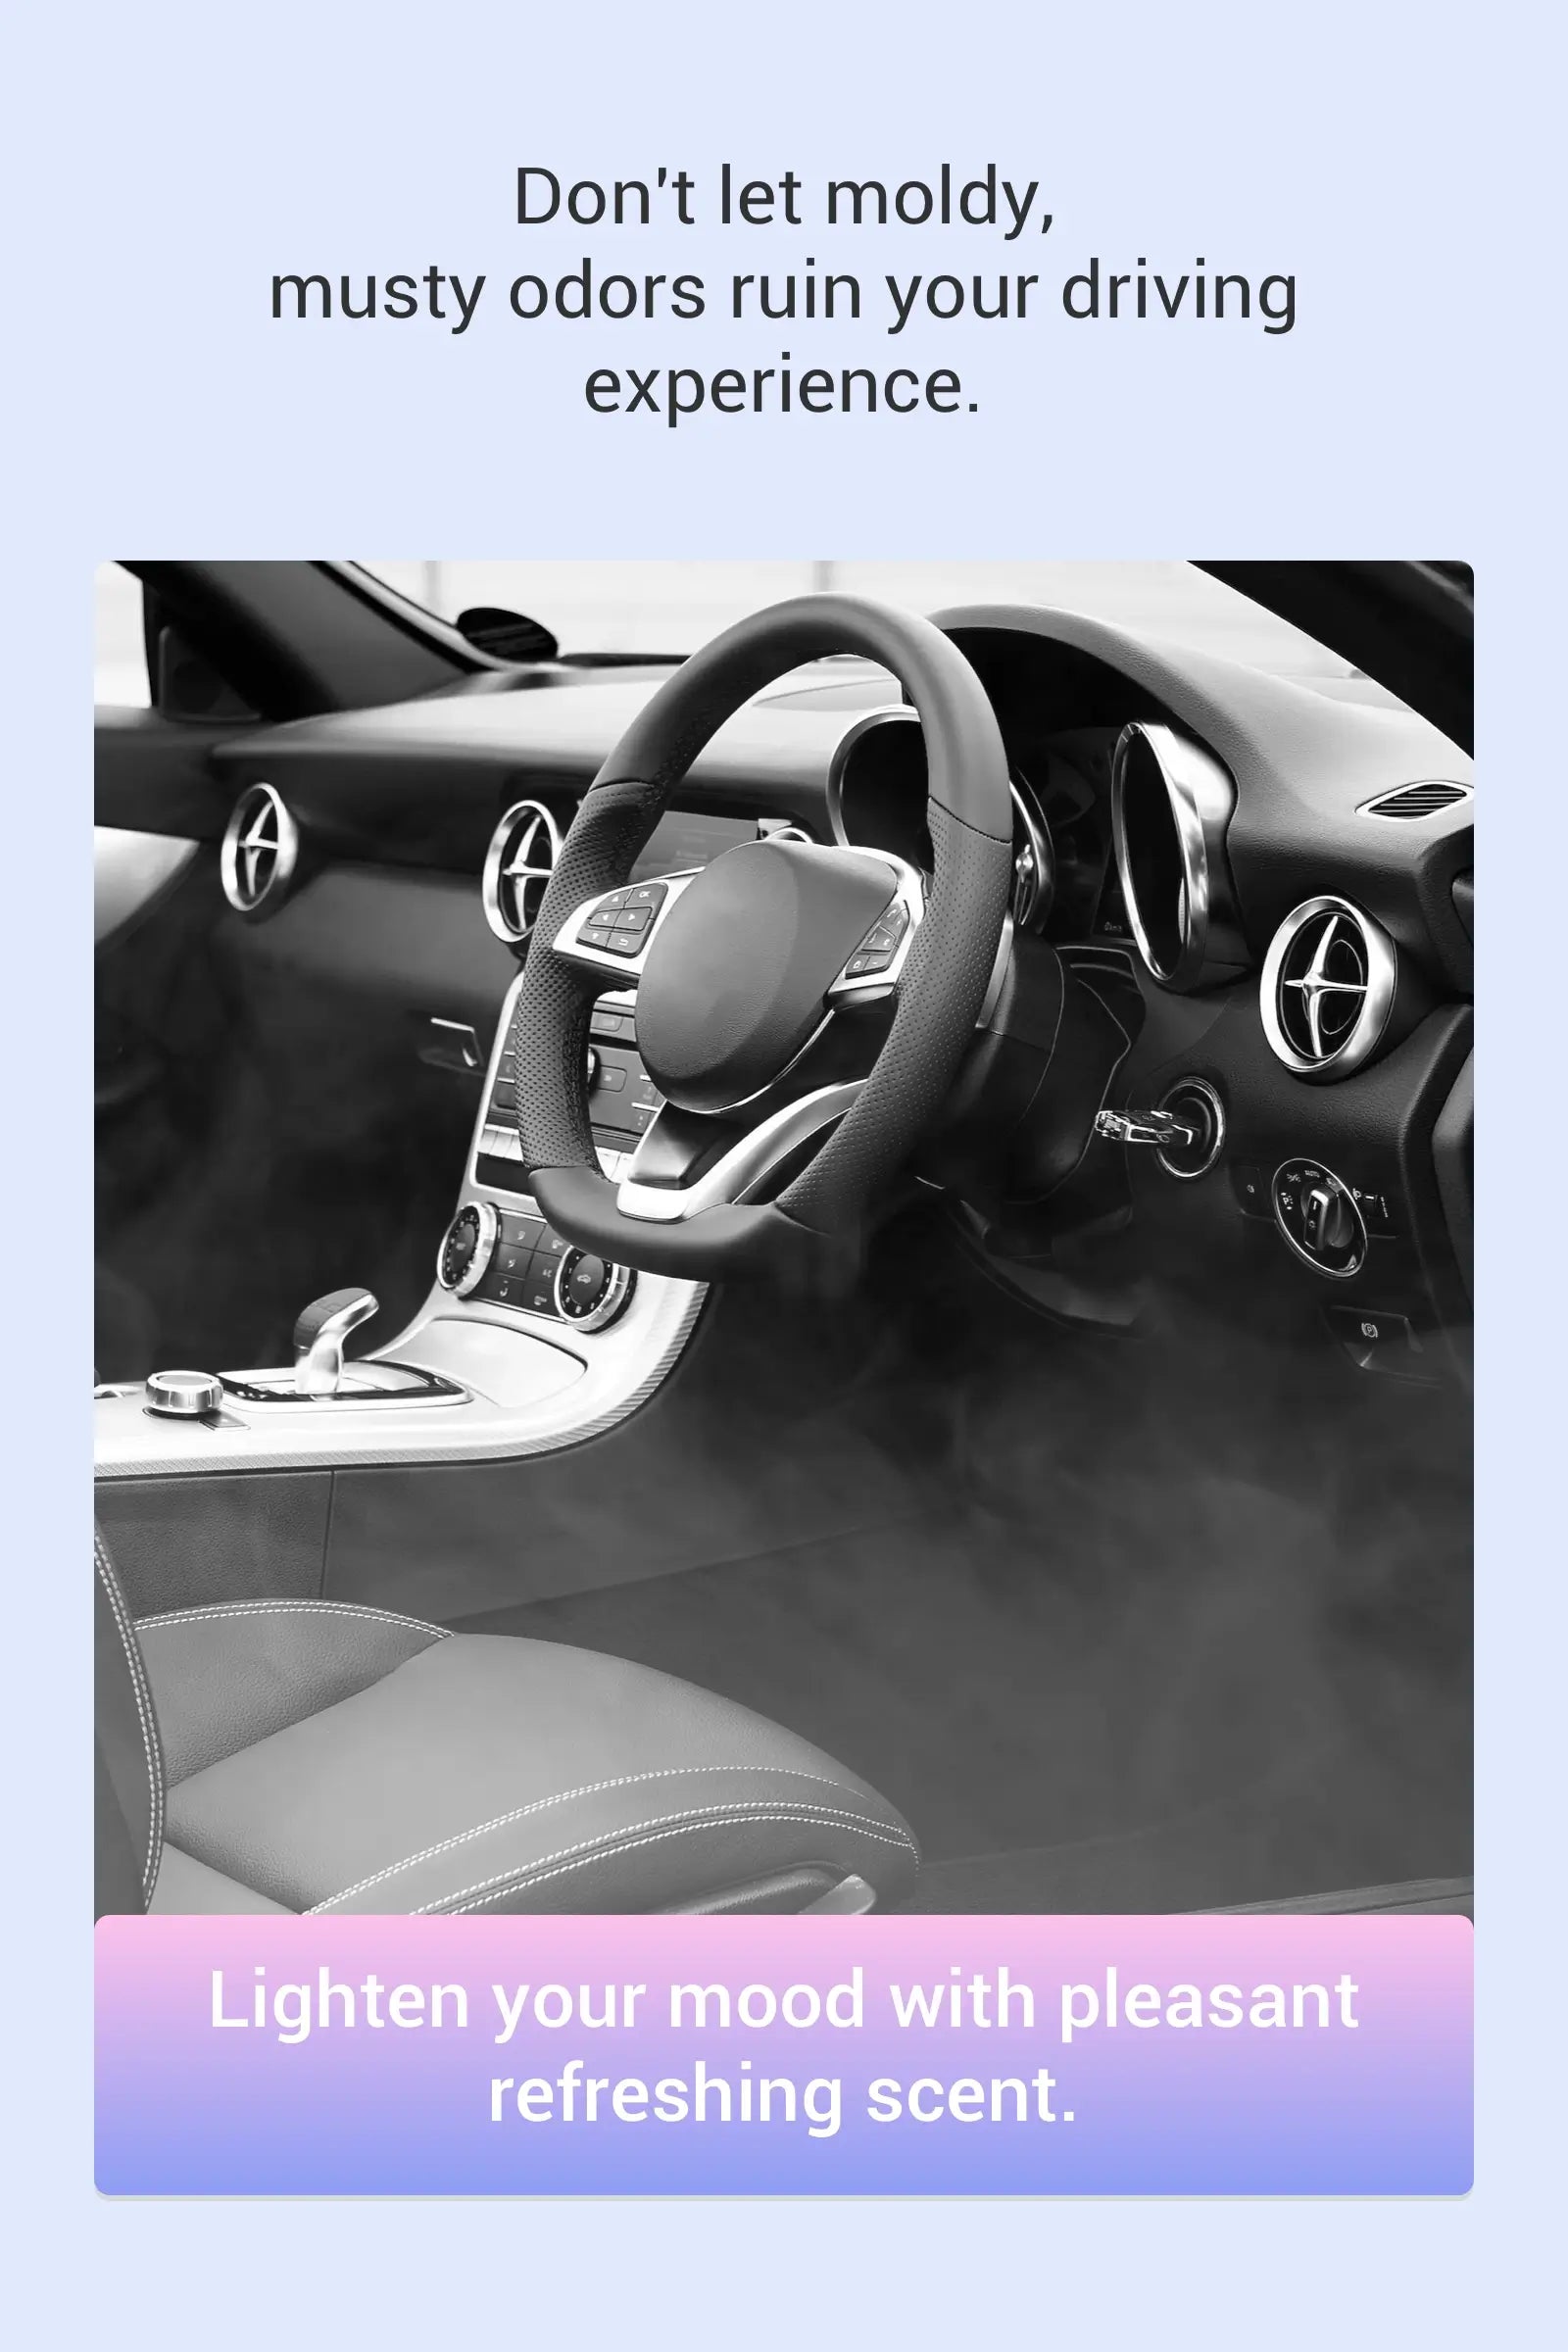 Don't let moldy, musty odors ruin your driving experience. Lighten your mood with pleasant refreshing scent.